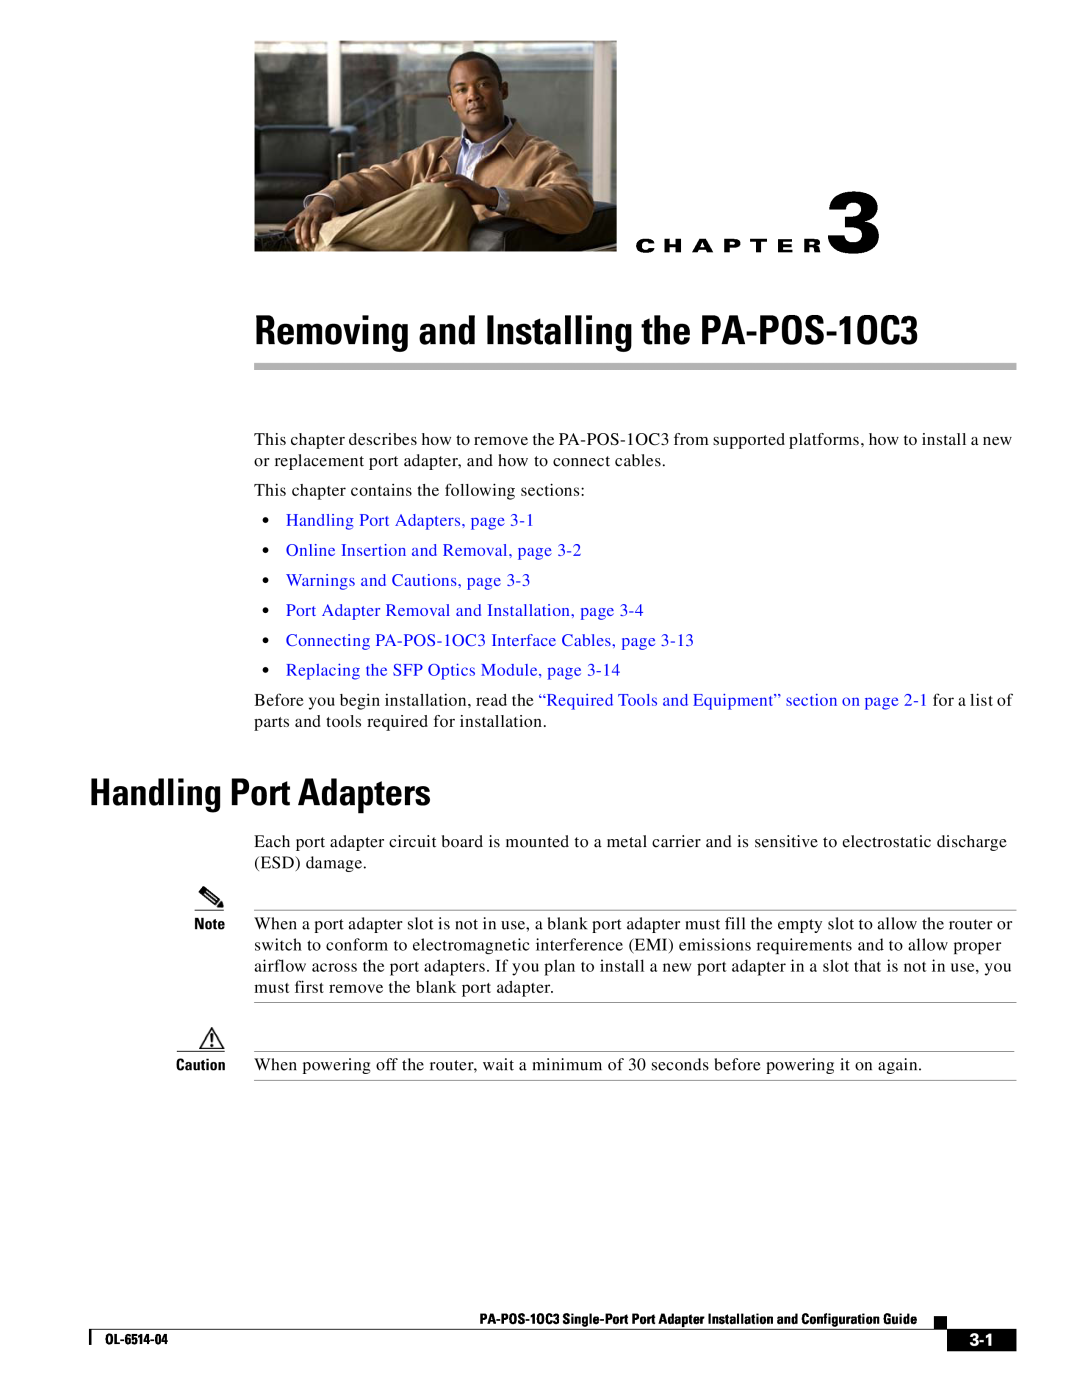 Cisco Systems PA-POS-2OC3 Removing and Installing the PA-POS-1OC3, Handling Port Adapters, Warnings and Cautions, page 